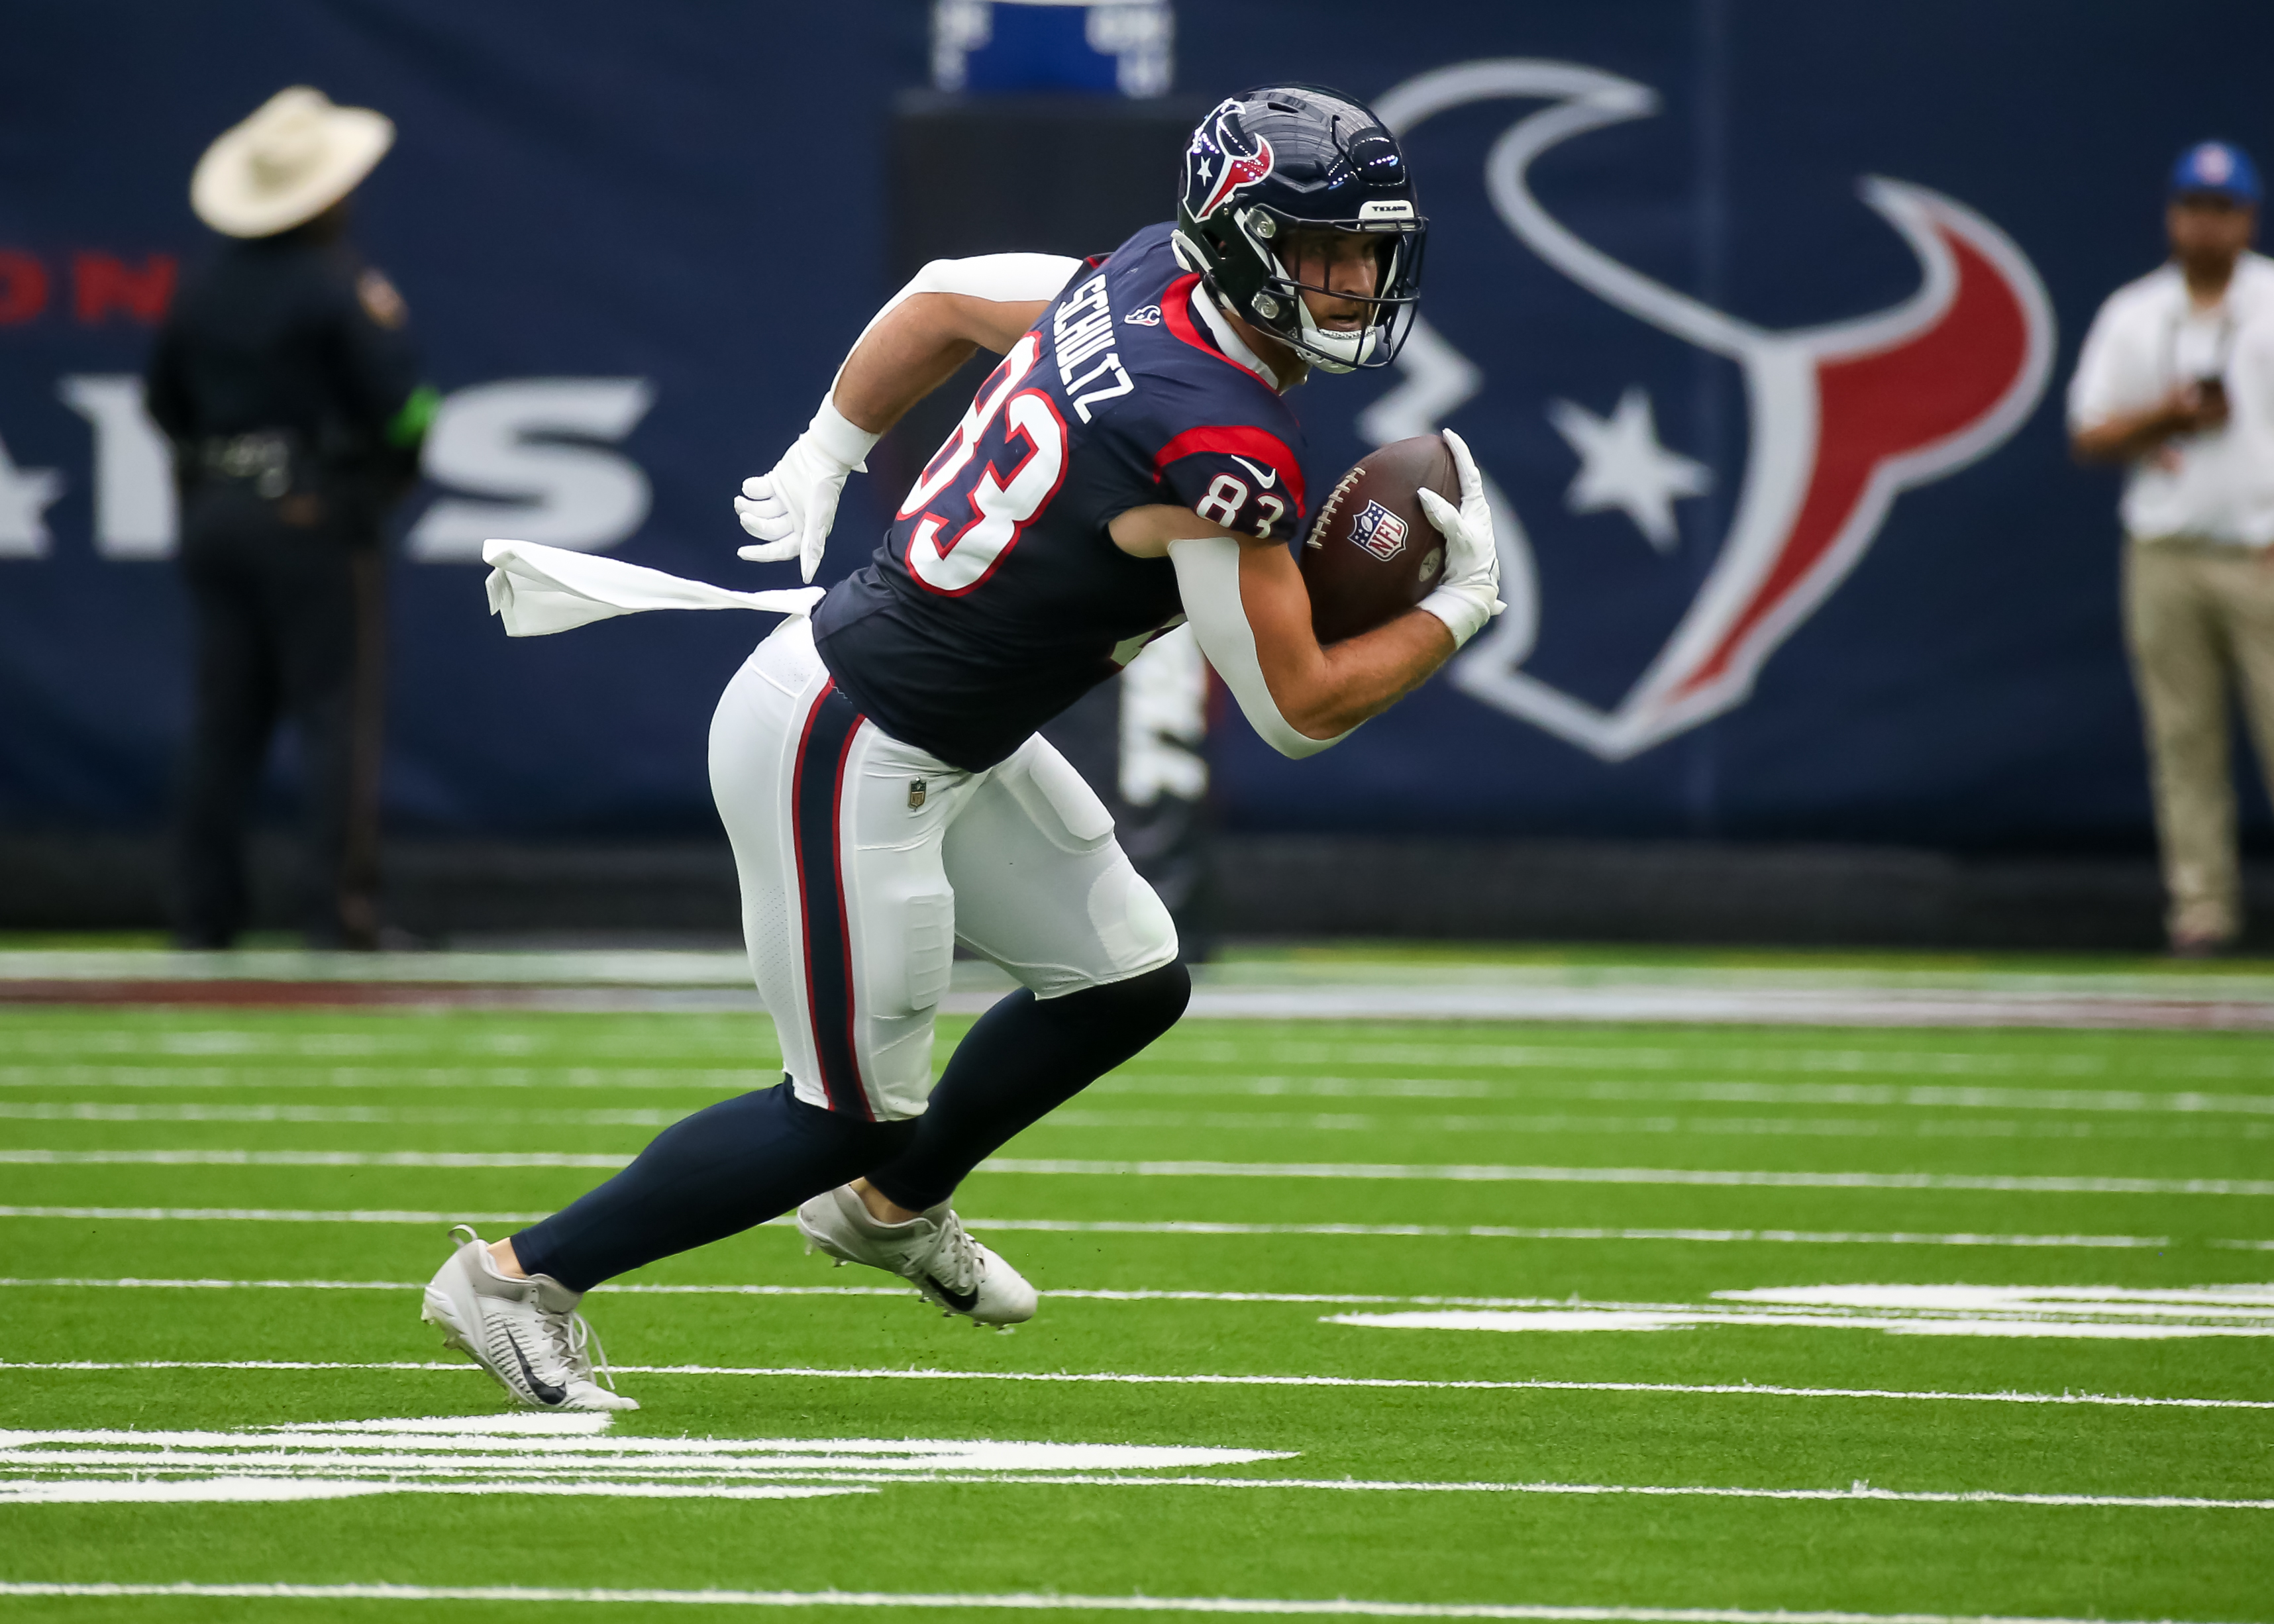 HOUSTON, TX - AUGUST 19: Houston Texans tight end Dalton Schultz (83) carries the ball in the second quarter during the preseason NFL game between the Miami Dolphins and Houston Texans on August 19, 2023 at NRG Stadium in Houston, Texas.